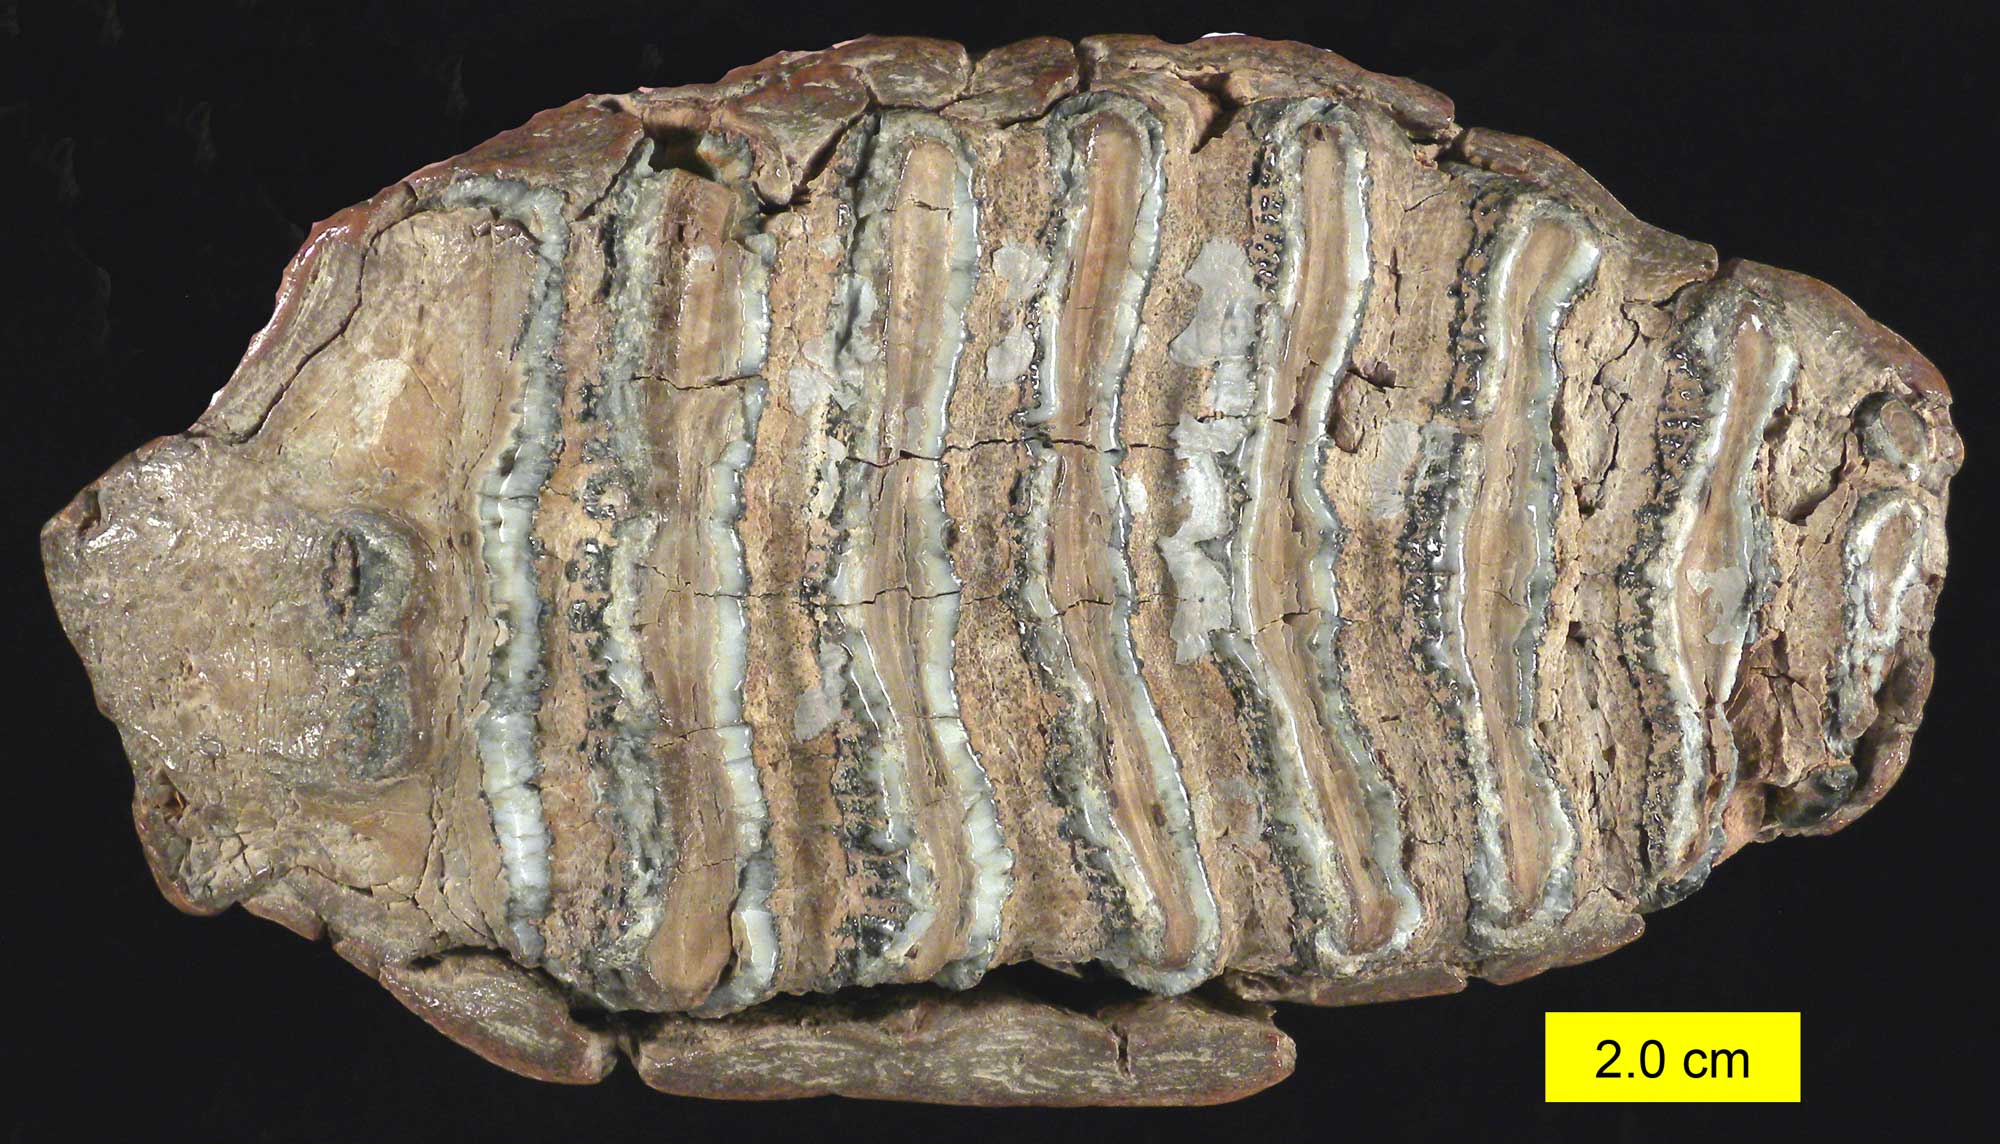 Photograph of the biting surface of a mammoth tooth from the Pleistocene of Ohio. The photo shows an oblong mammoth tooth with thin, parallel ridges on its biting surface. The ridges are oriented horizontally to the long axis of the biting surface of the tooth.